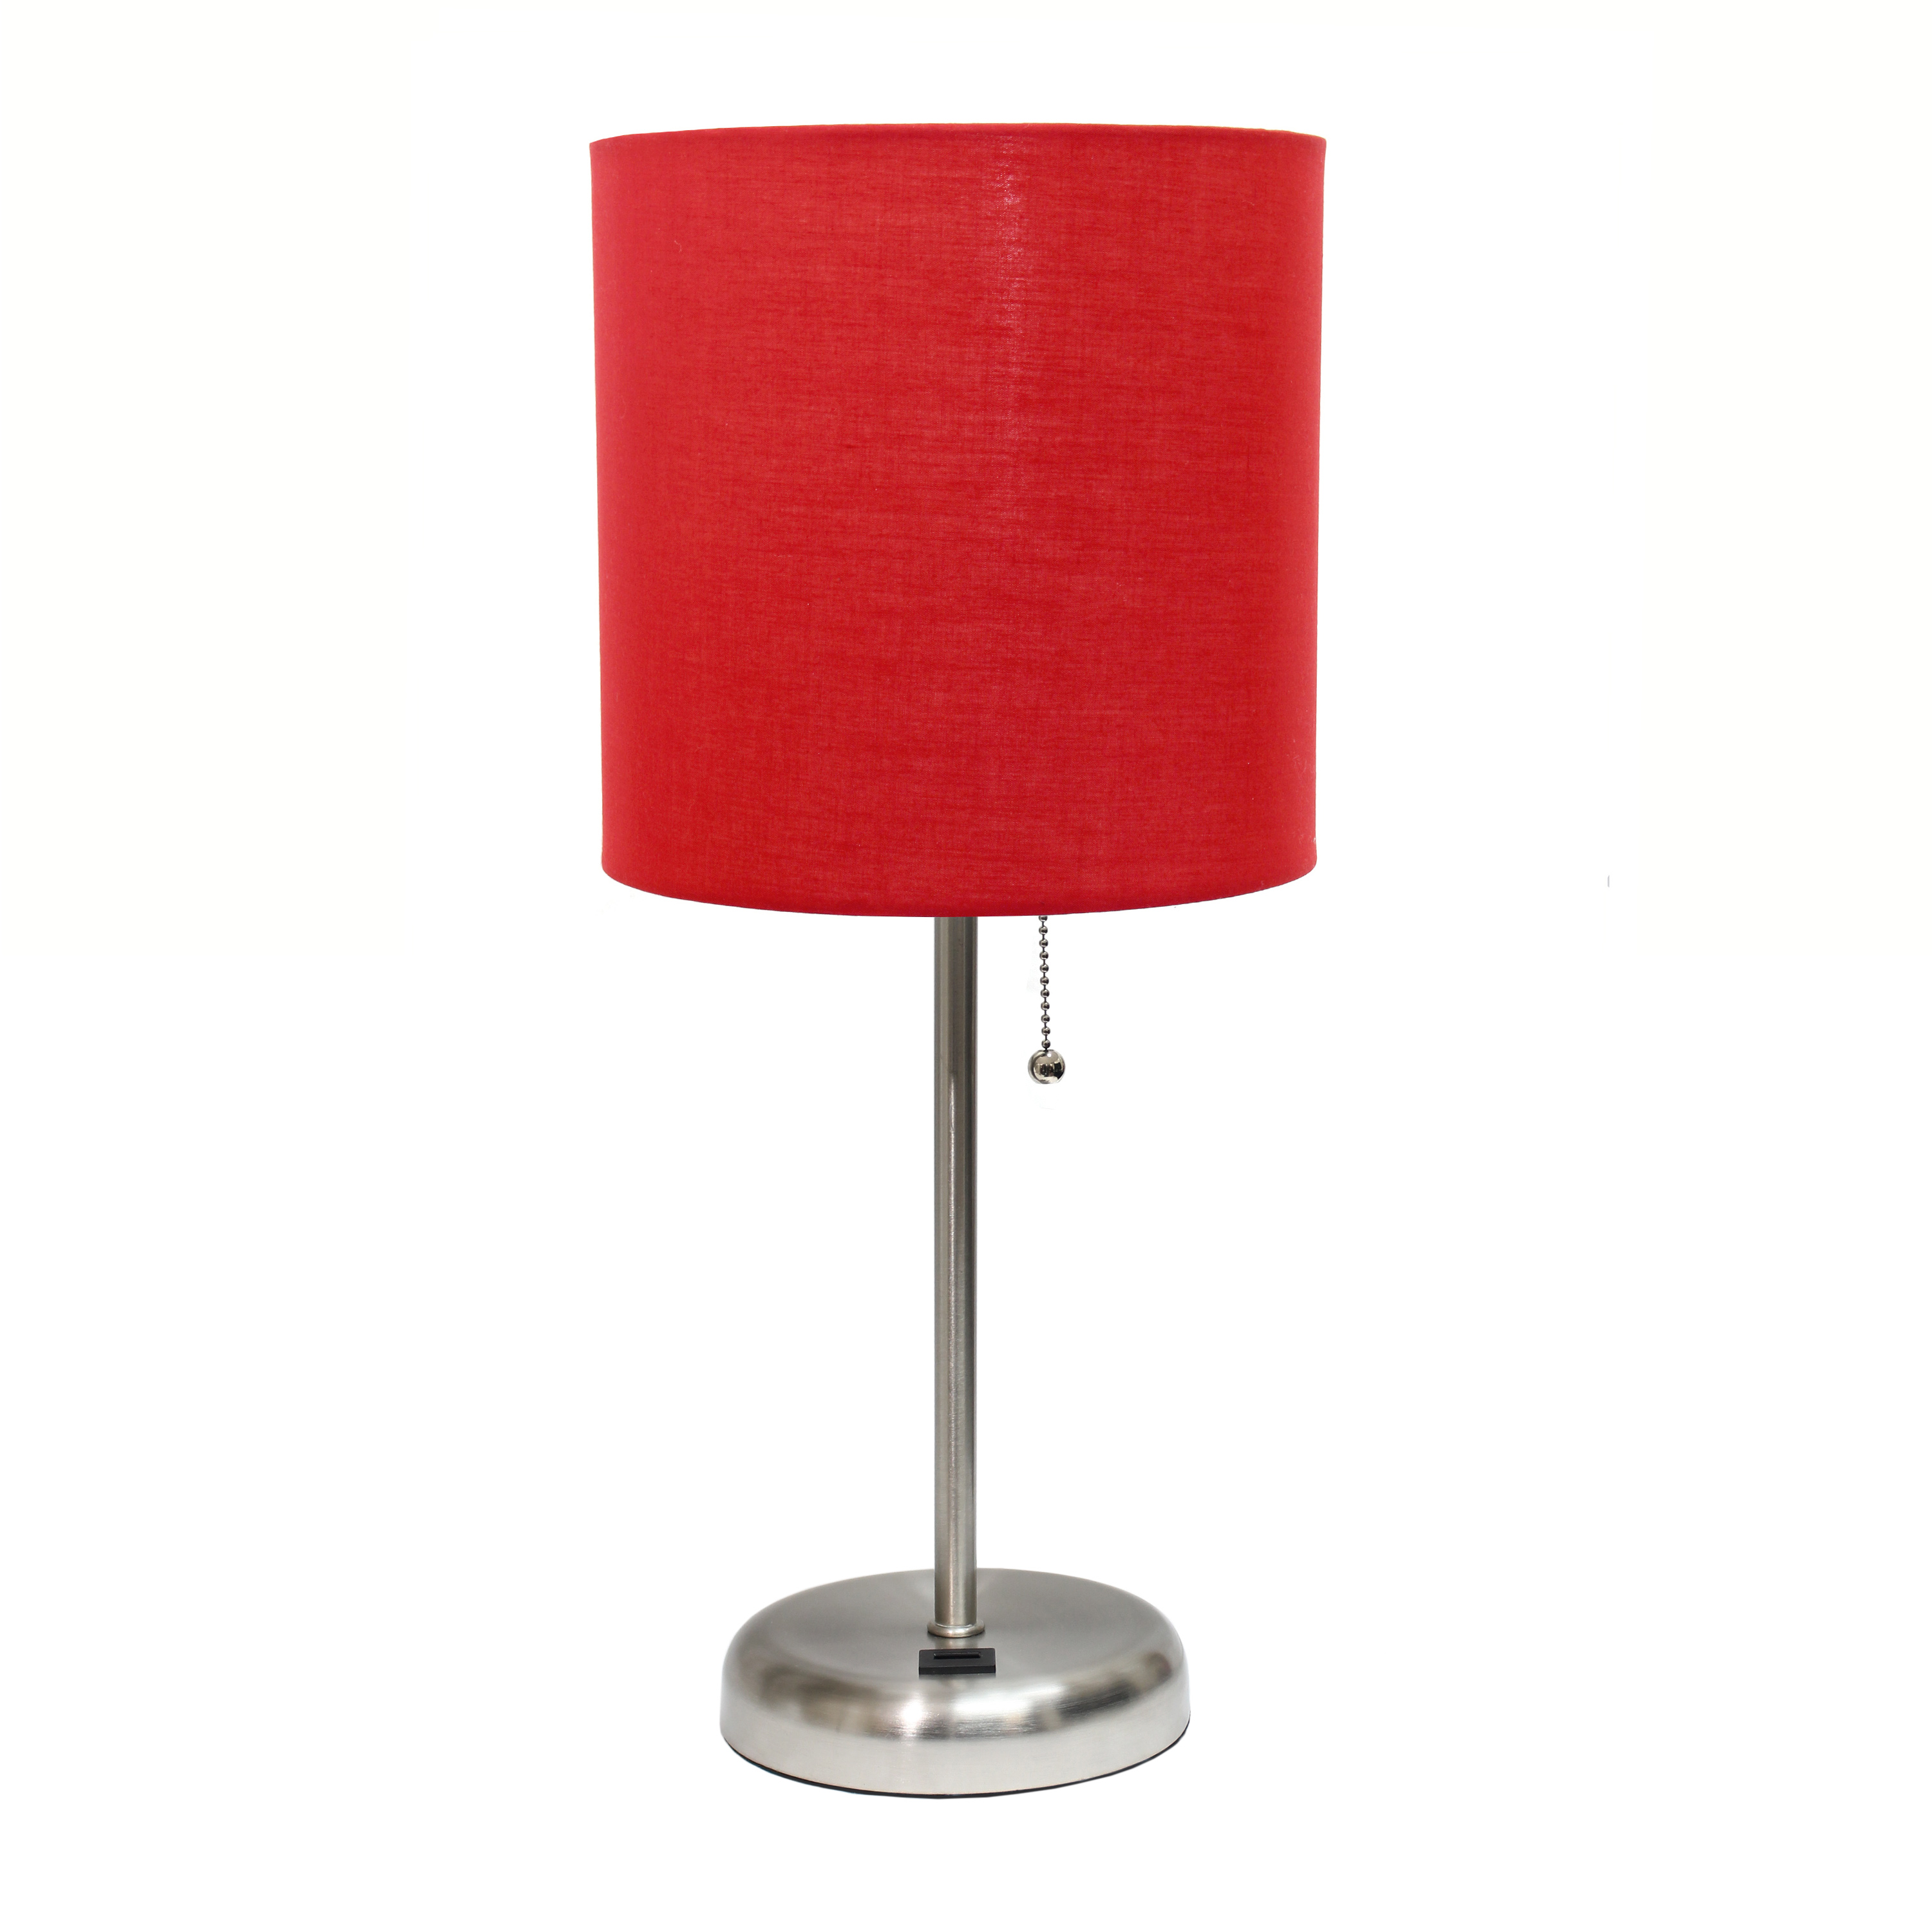 LimeLights Stick Lamp with USB charging port and Fabric Shade, Red